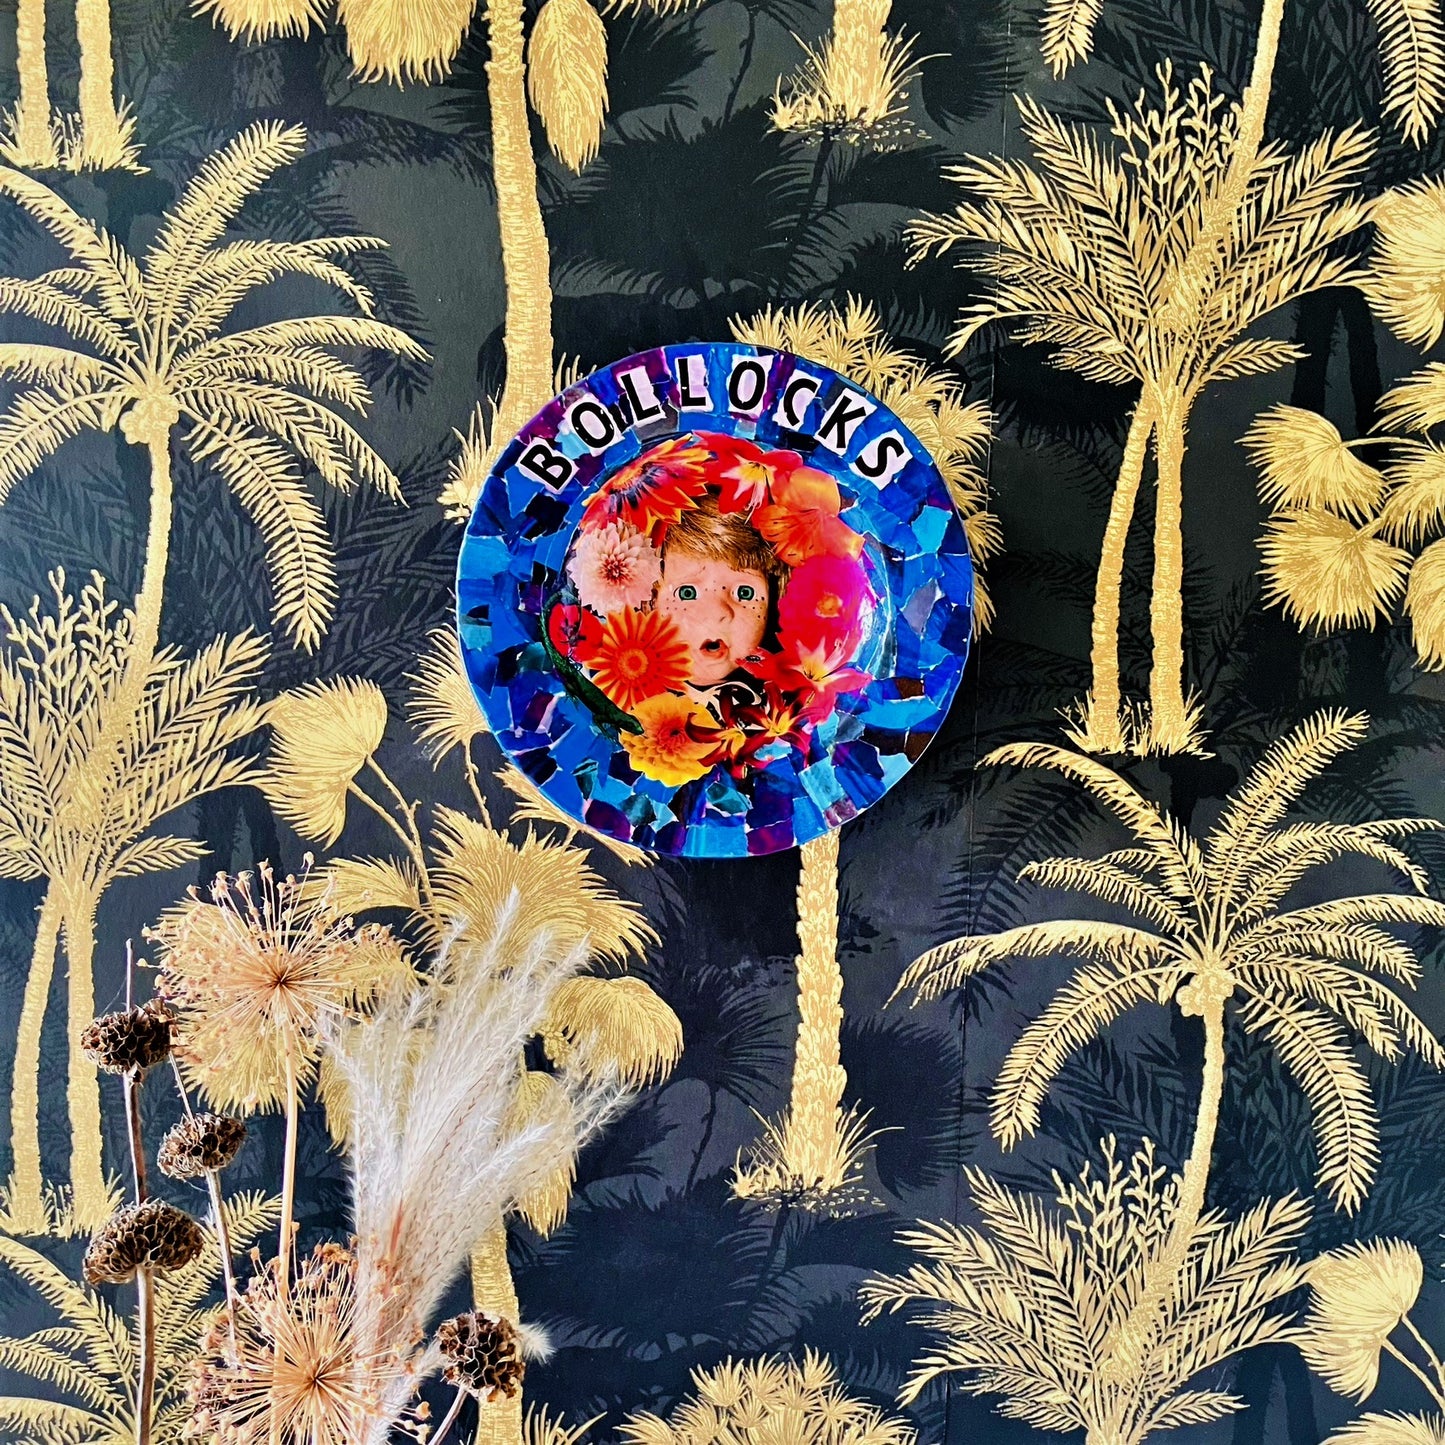 "Bollocks" Wall Plate by House of Frisson, featuring a collage of a vintage male doll surrounded by flowers and a lizard, on a blue background. Plate hanging on a wall papered wall.